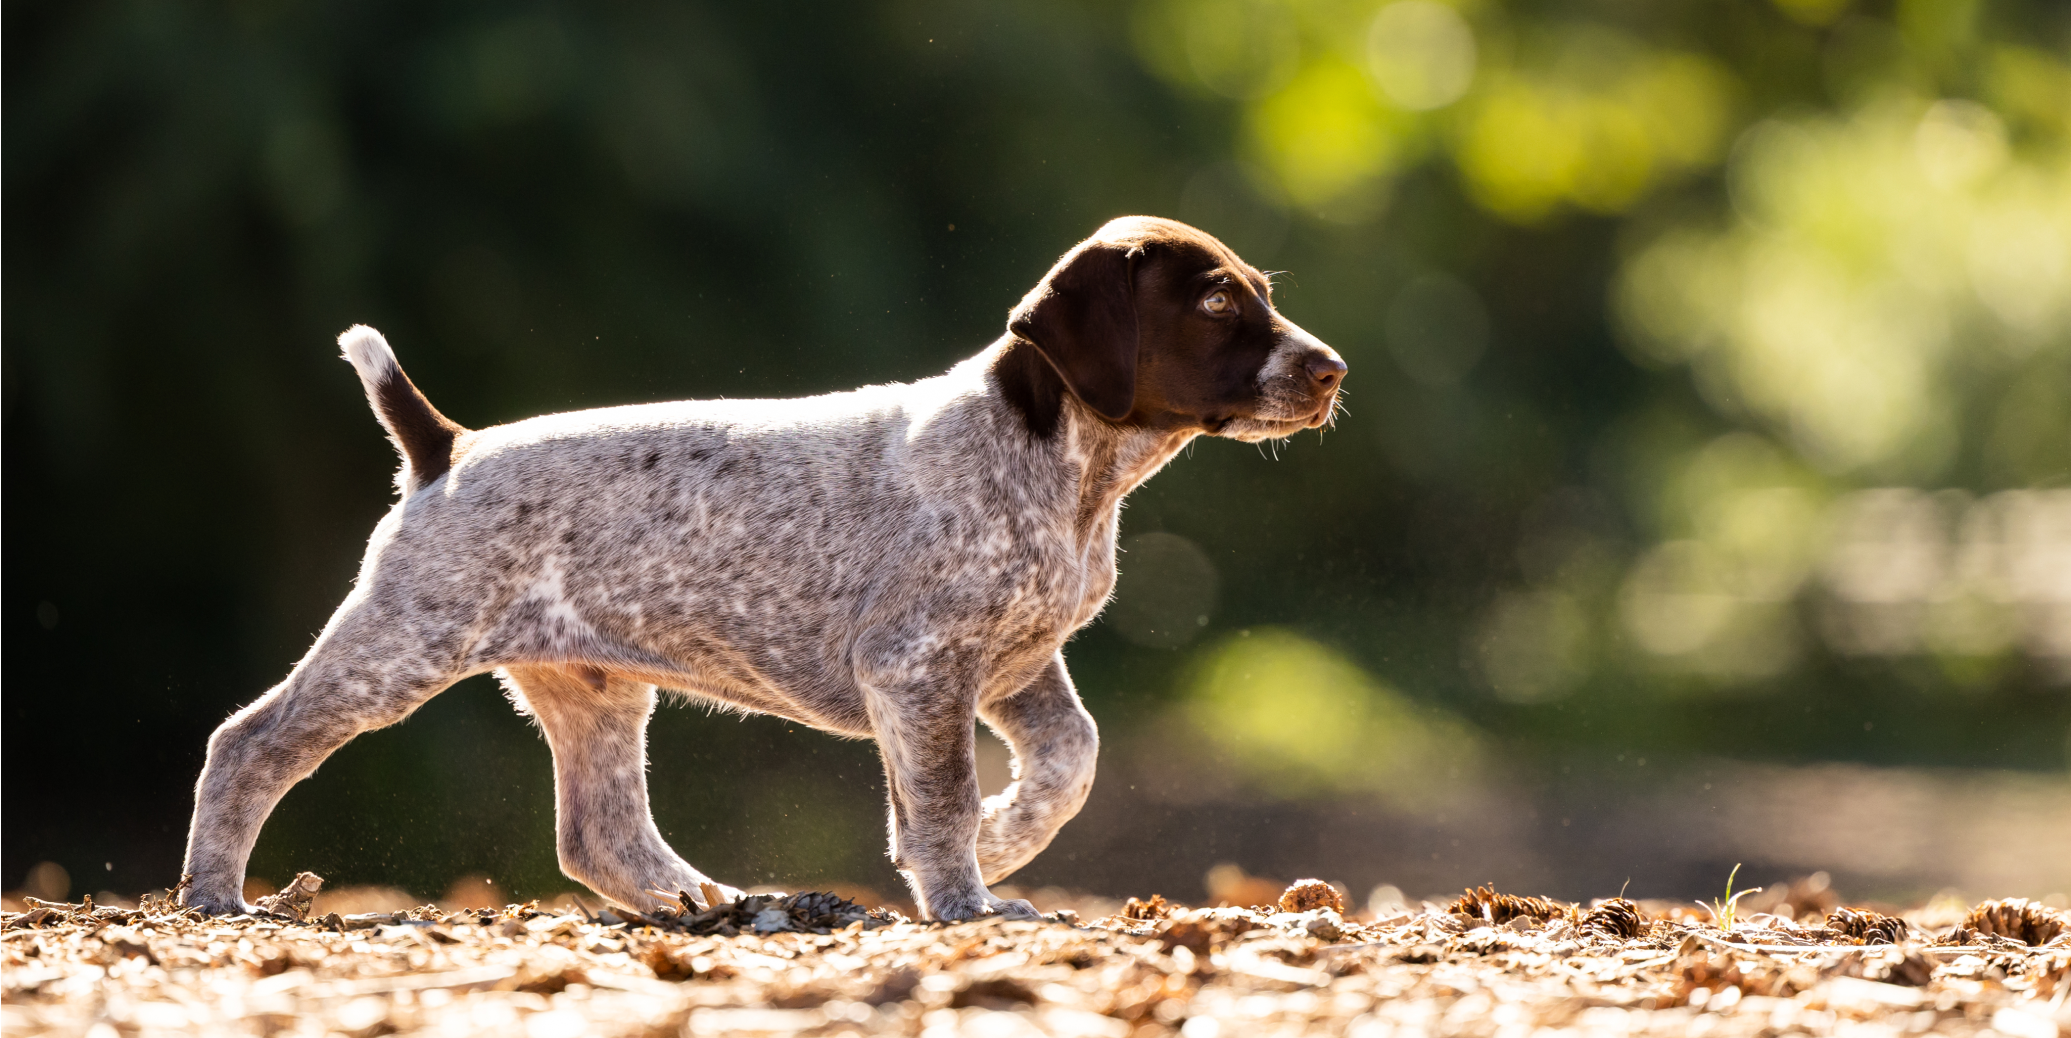 A german shorthaired pointer walking